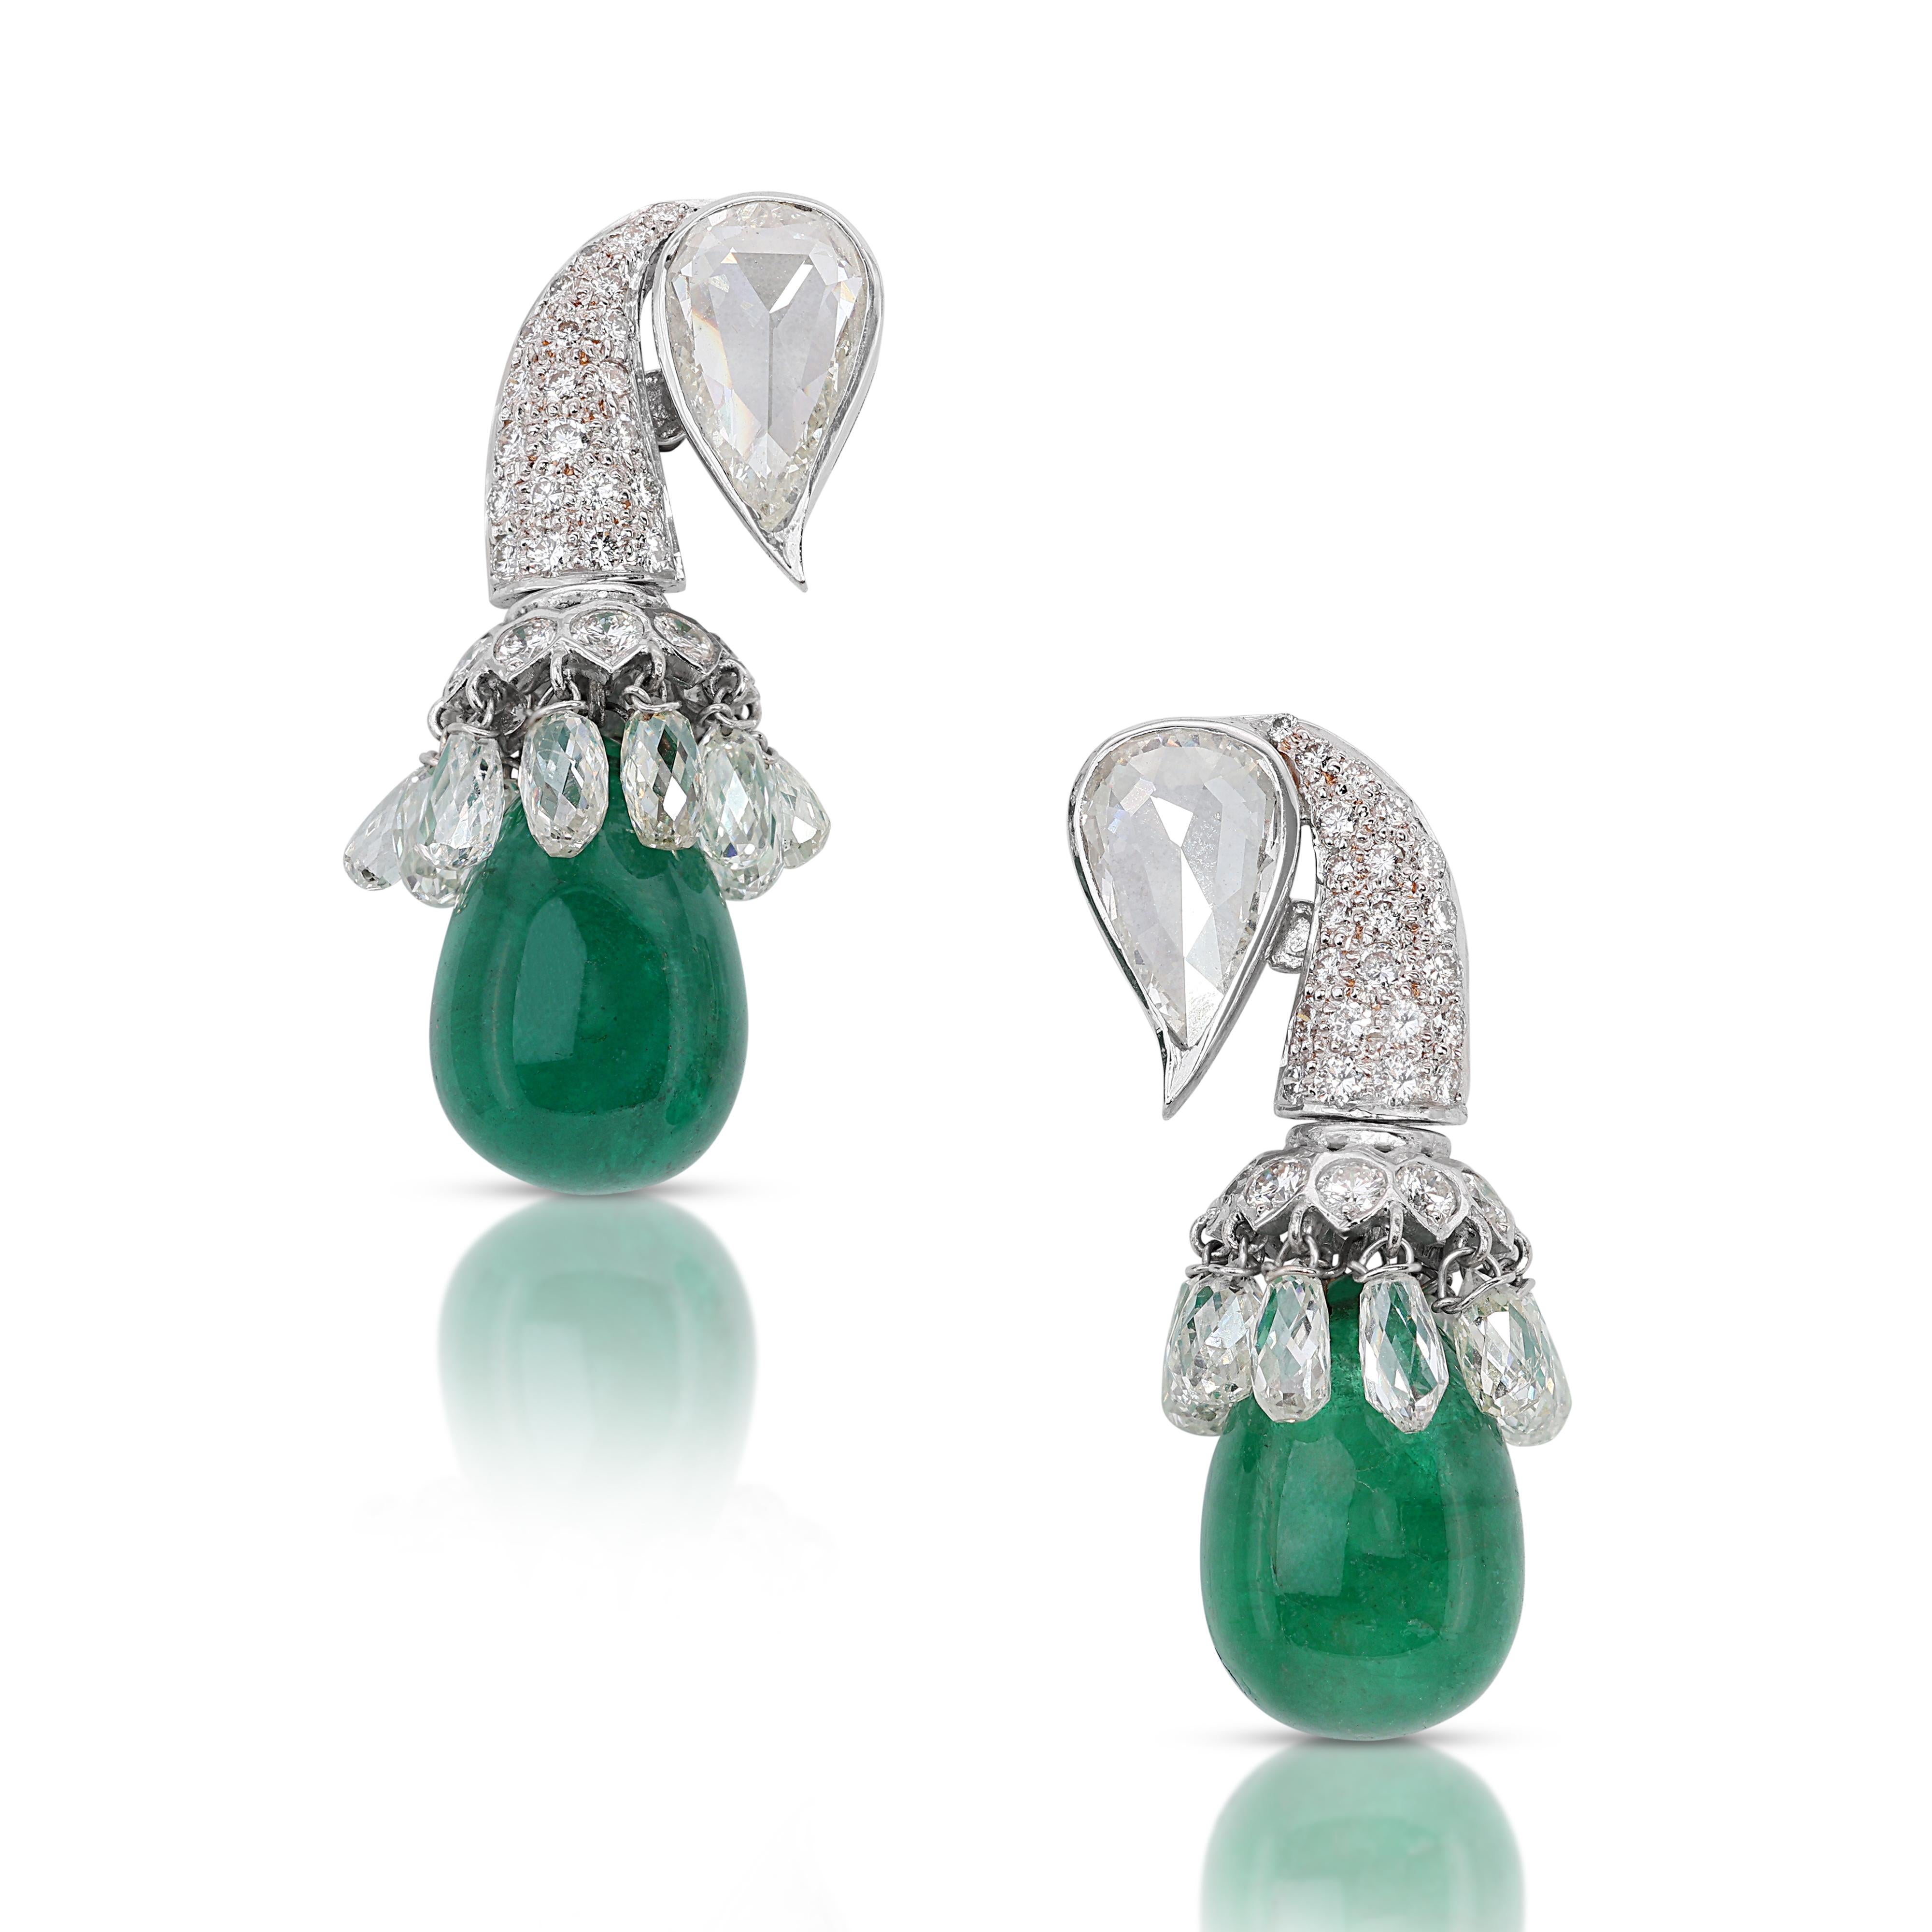 Gorgeous 24.31ct Green Emerald Teardrop Earrings with Diamonds in 18K White Gold For Sale 3